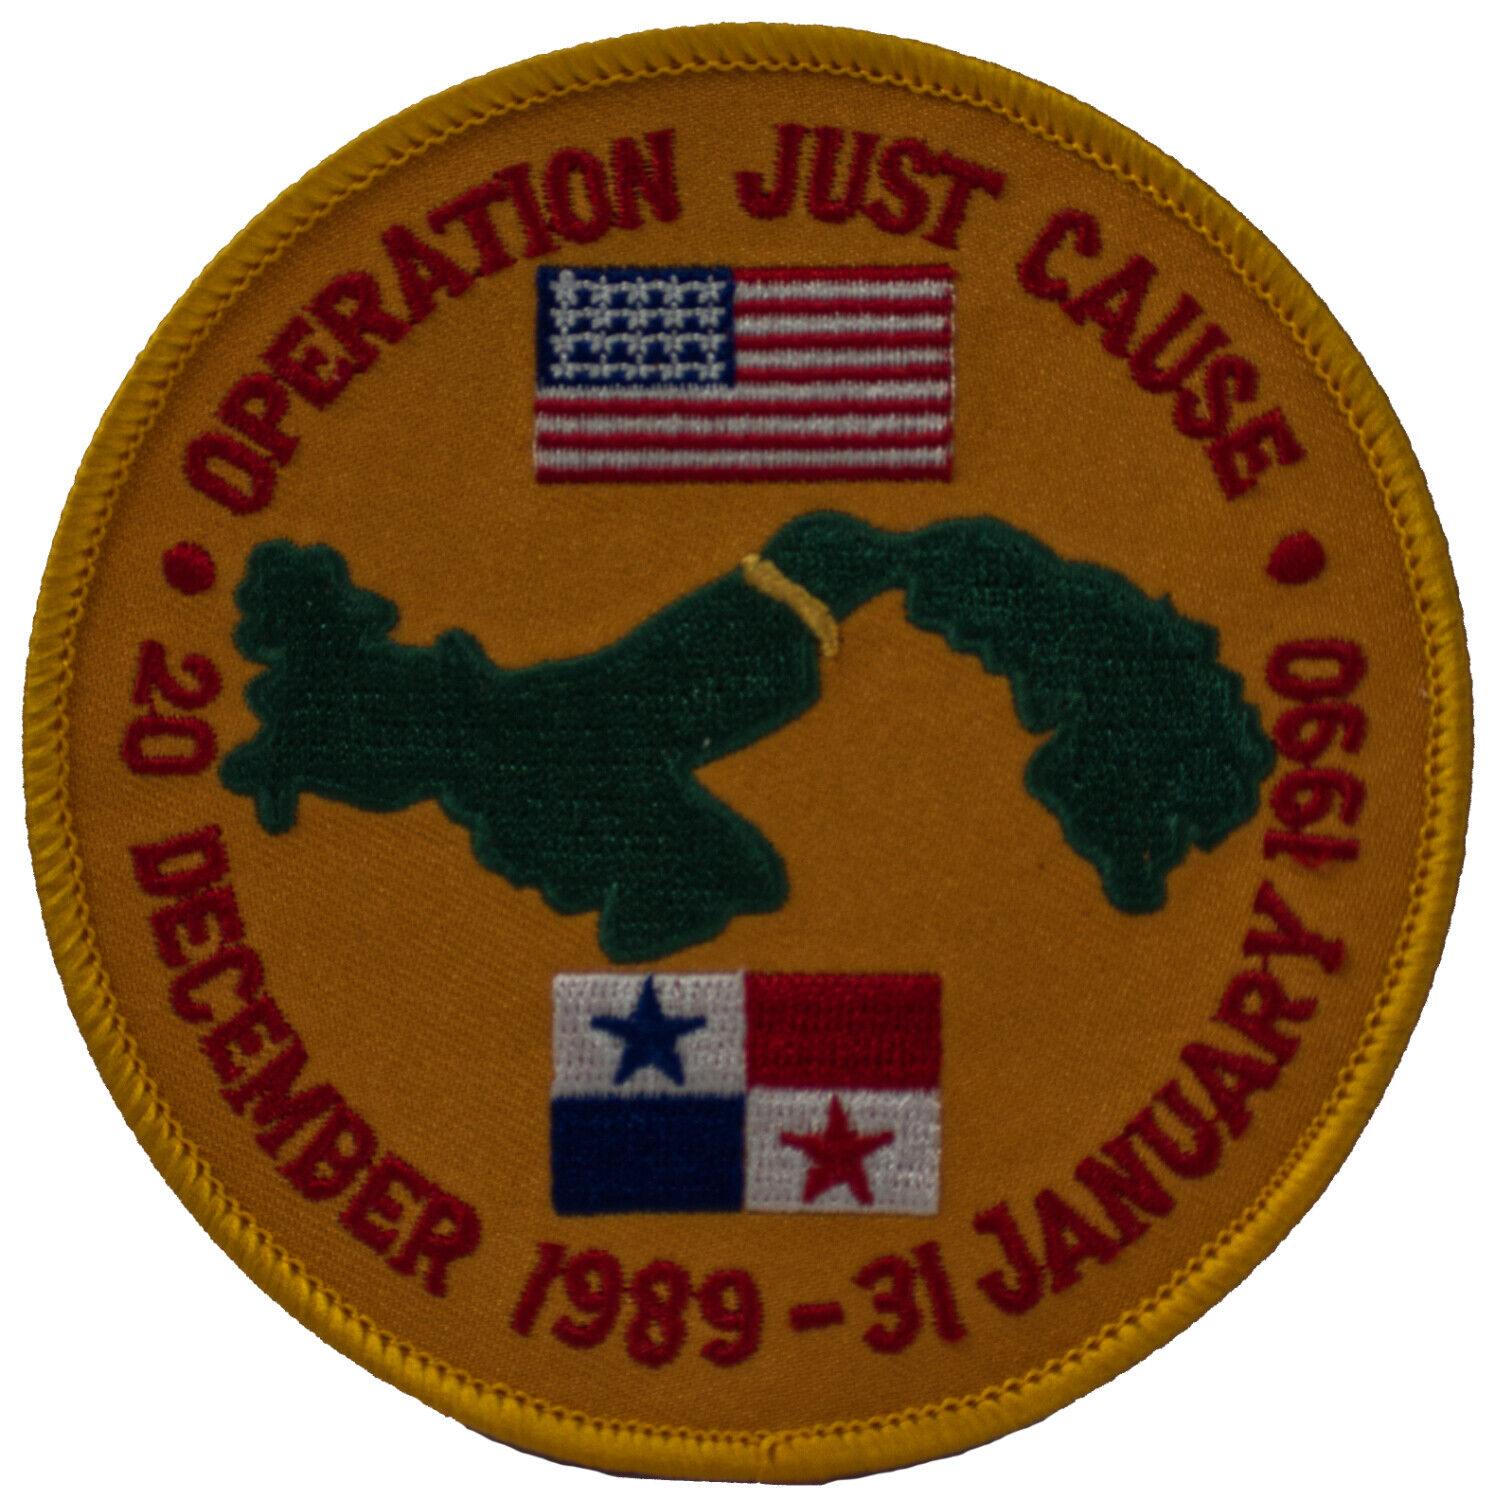 OPERATION JUST CAUSE 1989-1990 PANAMA CONFLICT PATCH NORIEGA